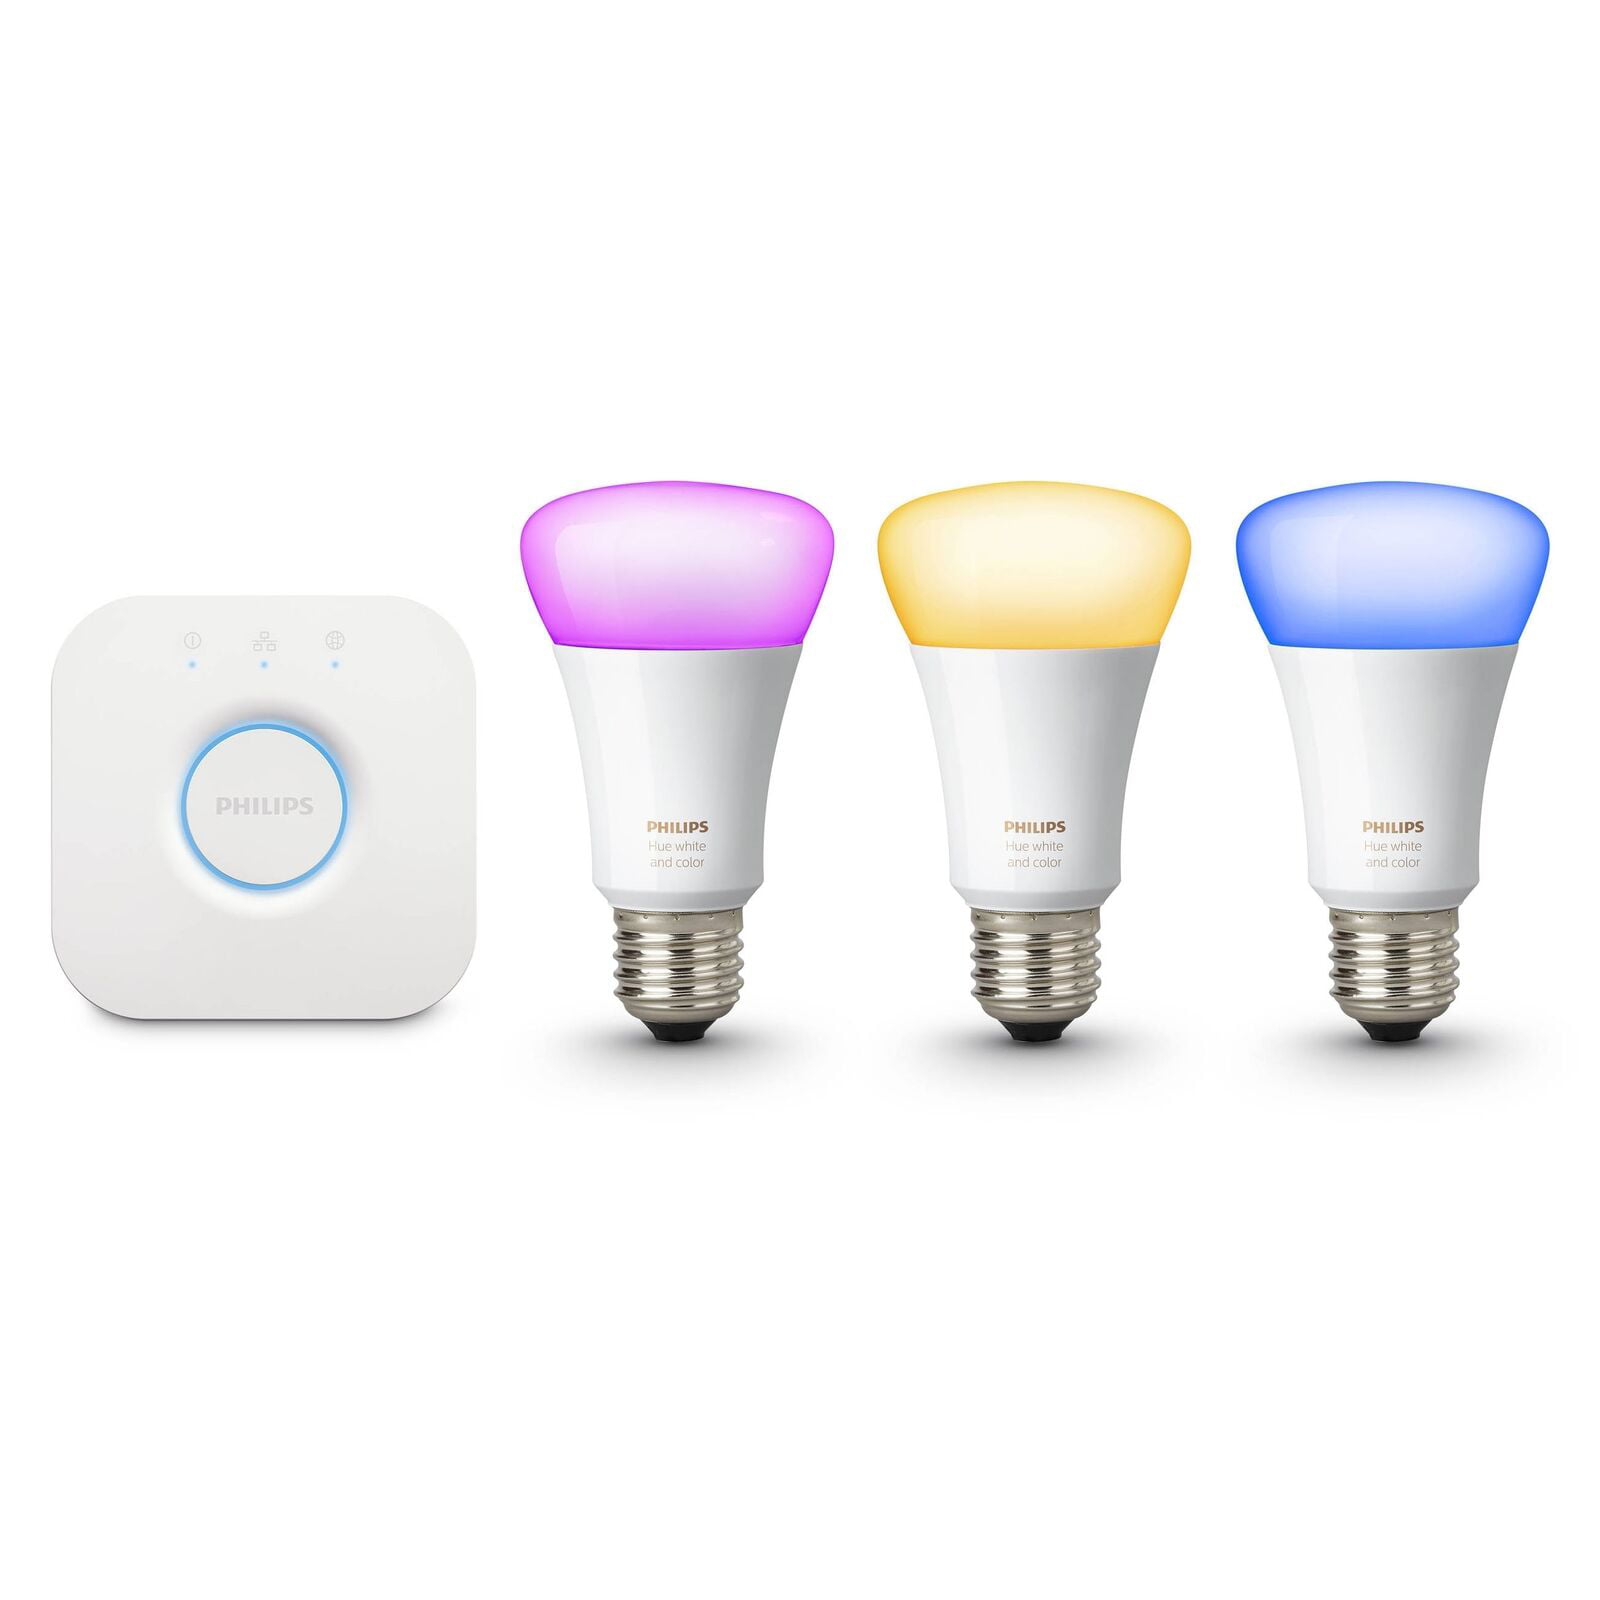 Details about   Philips Hue White and Color Starter Kit Hub BRAND NEW - Open Box 3 Bulbs A19 